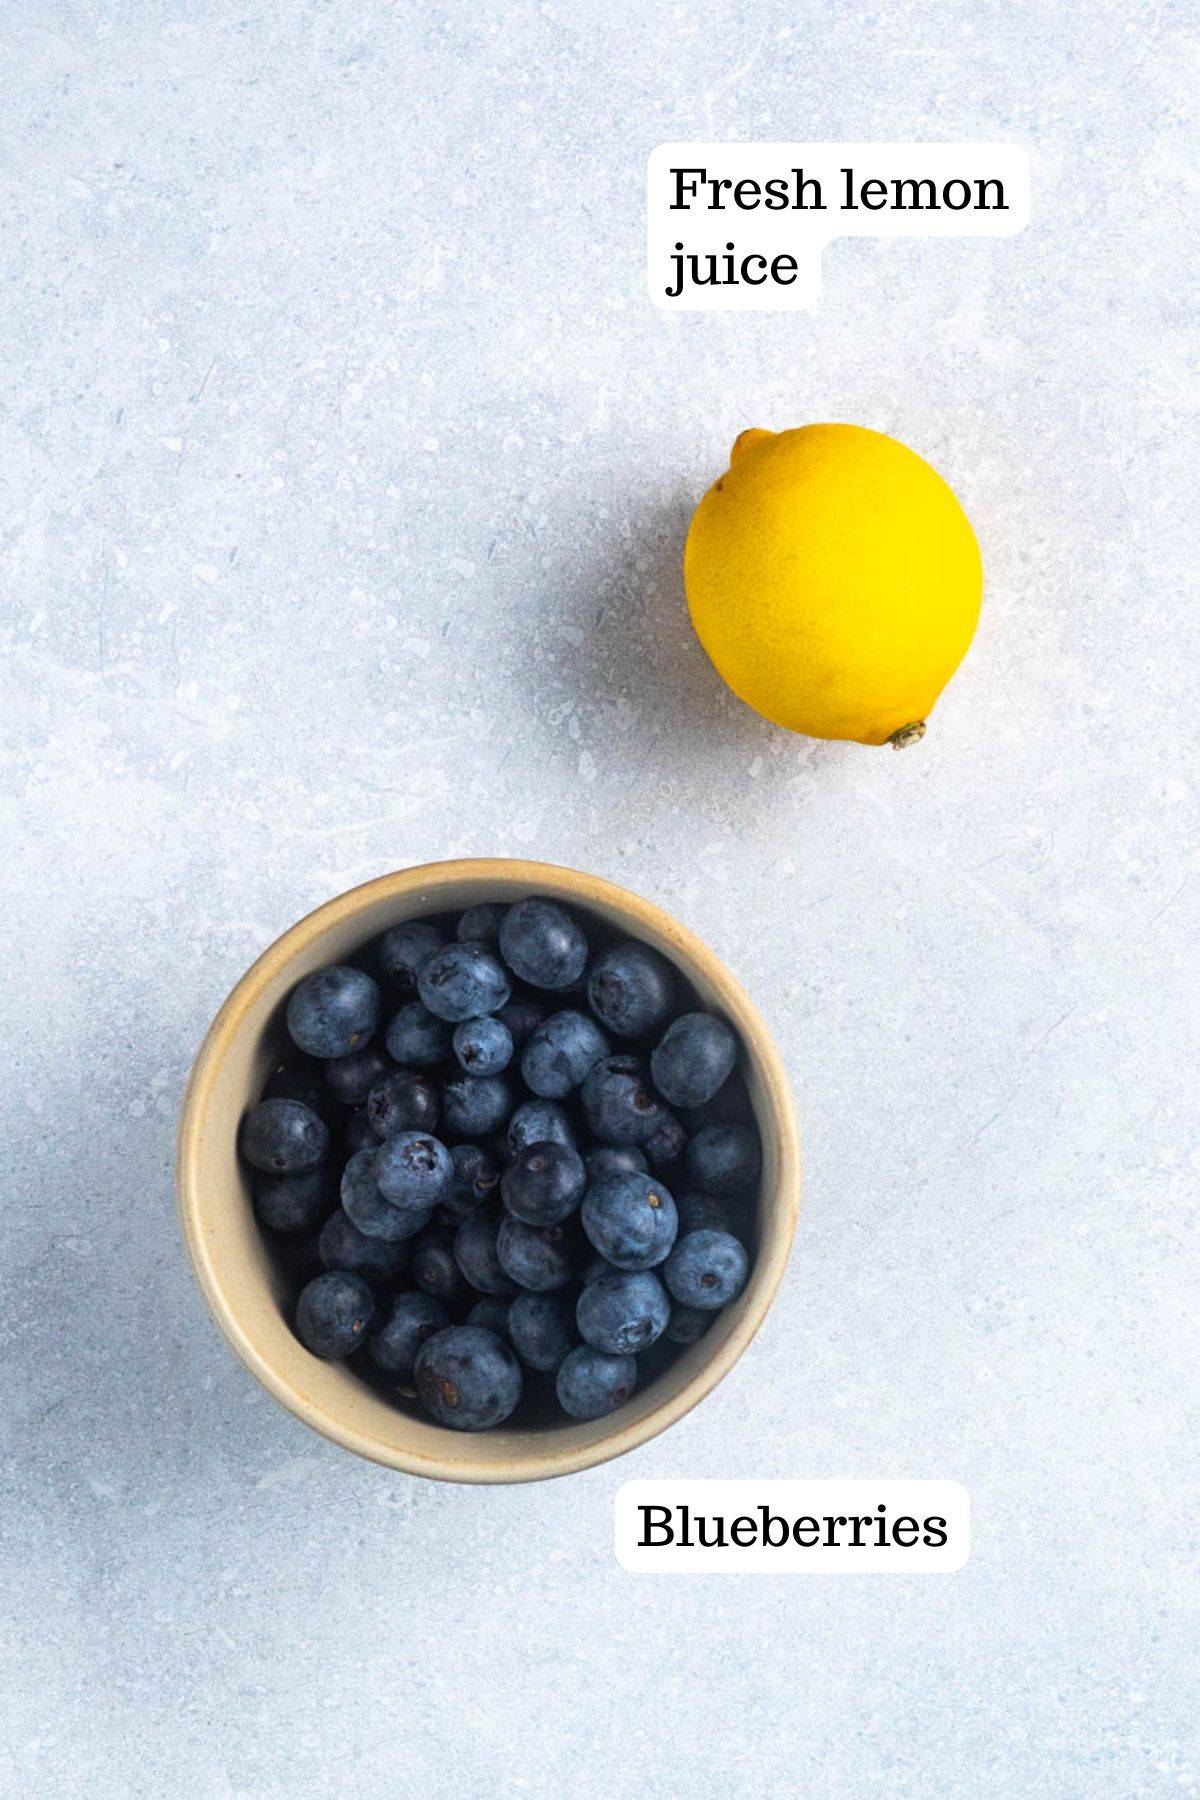 This image shows the fresh lemon and fresh blueberries before they are placed in a pot to cook down for the blueberry frosting.